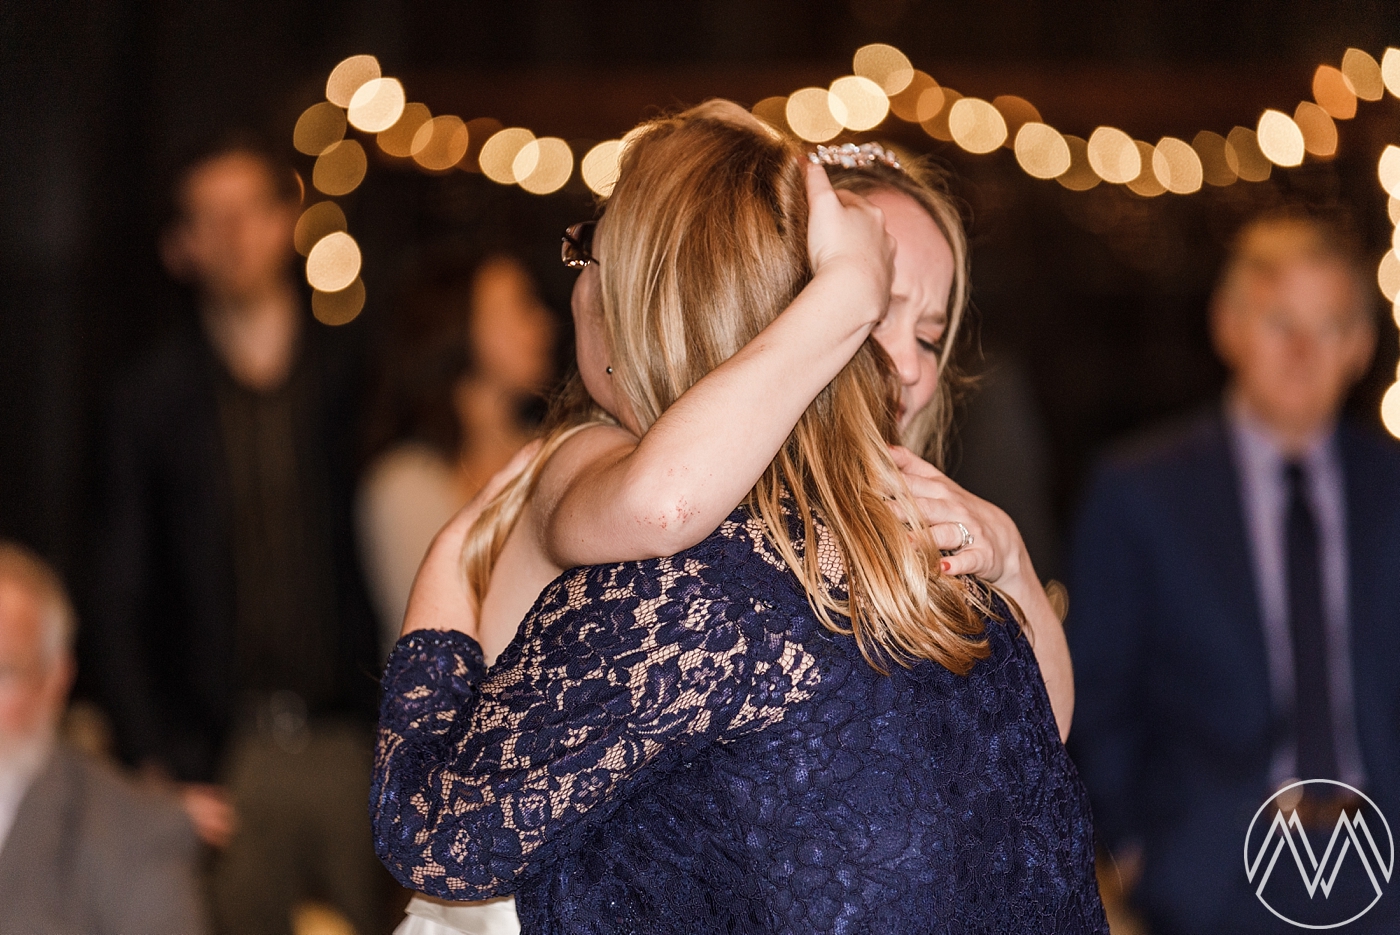 Special moment between the bride and her mother during the first dance | Megan Montalvo Photography